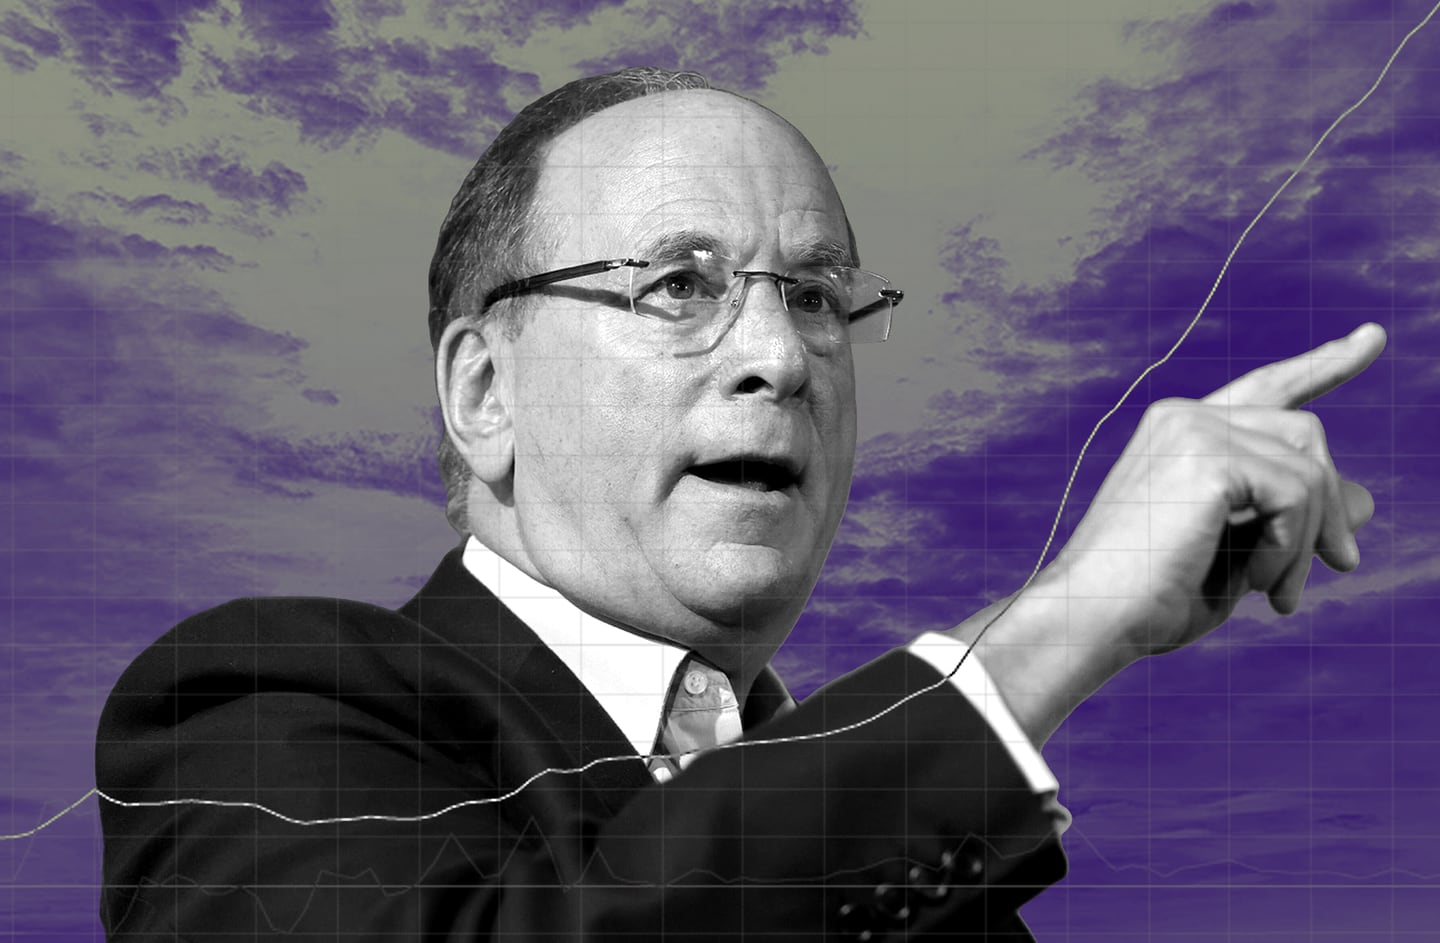 Portrait of Larry Fink with a upward financial curve superimposed and clouds and the background.